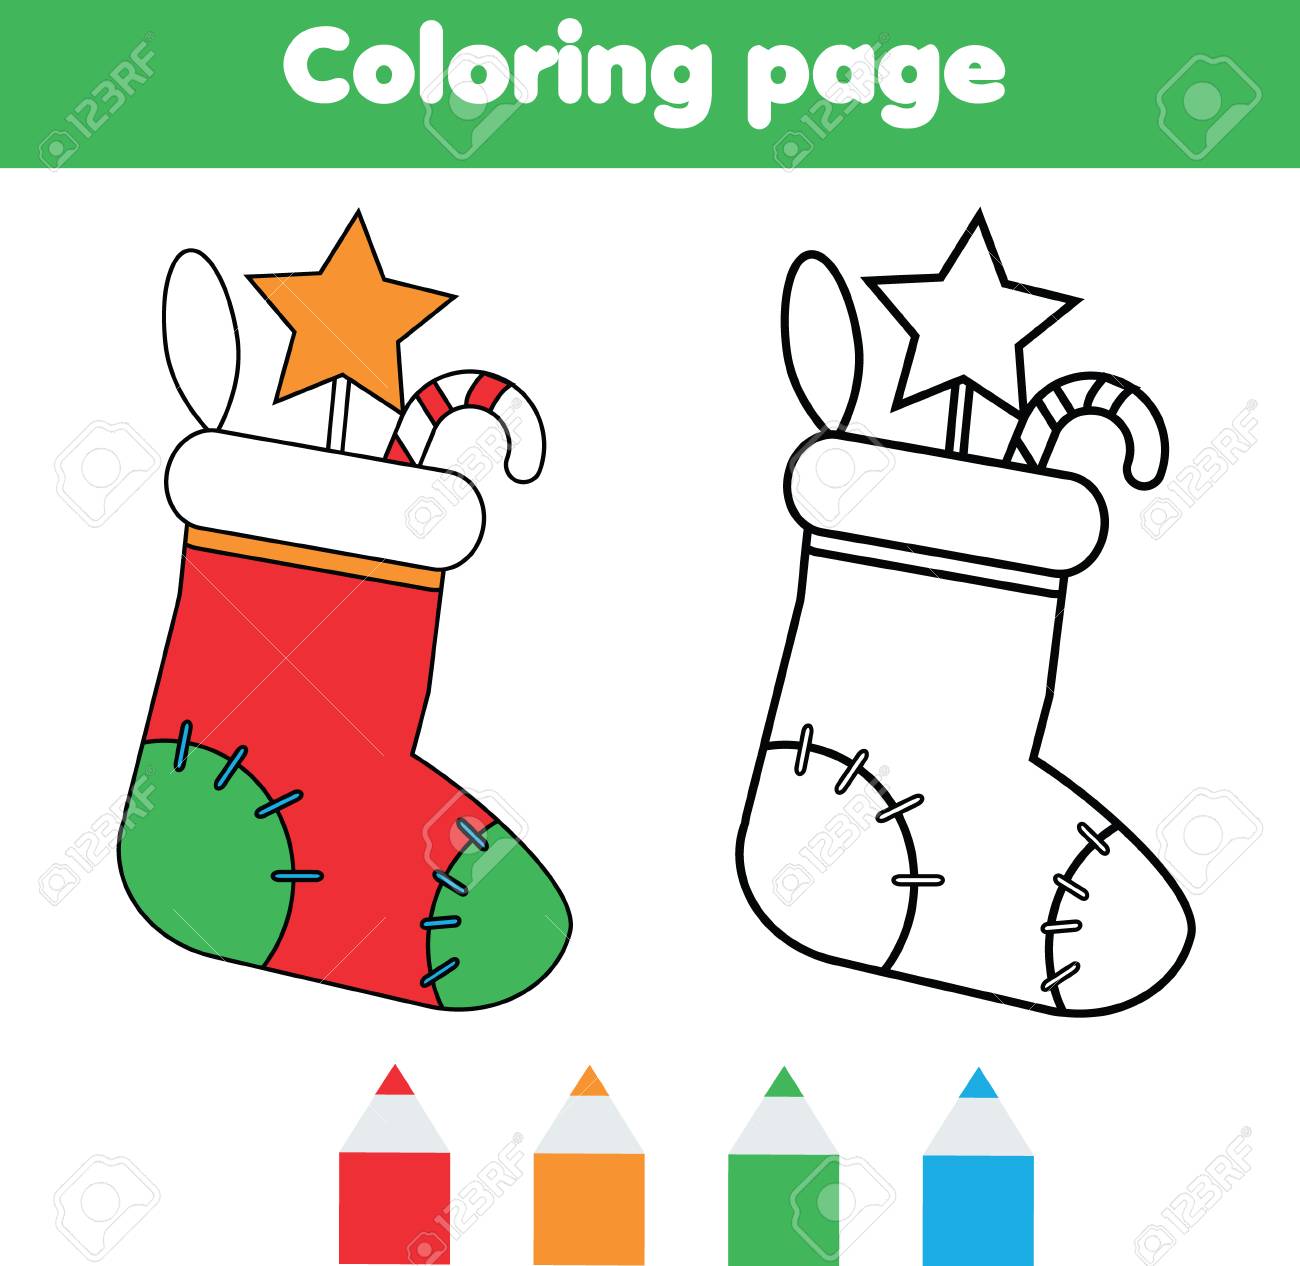 Coloring page with christmas sock with gifts color the picture educational children game drawing kids activity printable sheet new year winter holidays theme royalty free svg cliparts vectors and stock illustration image